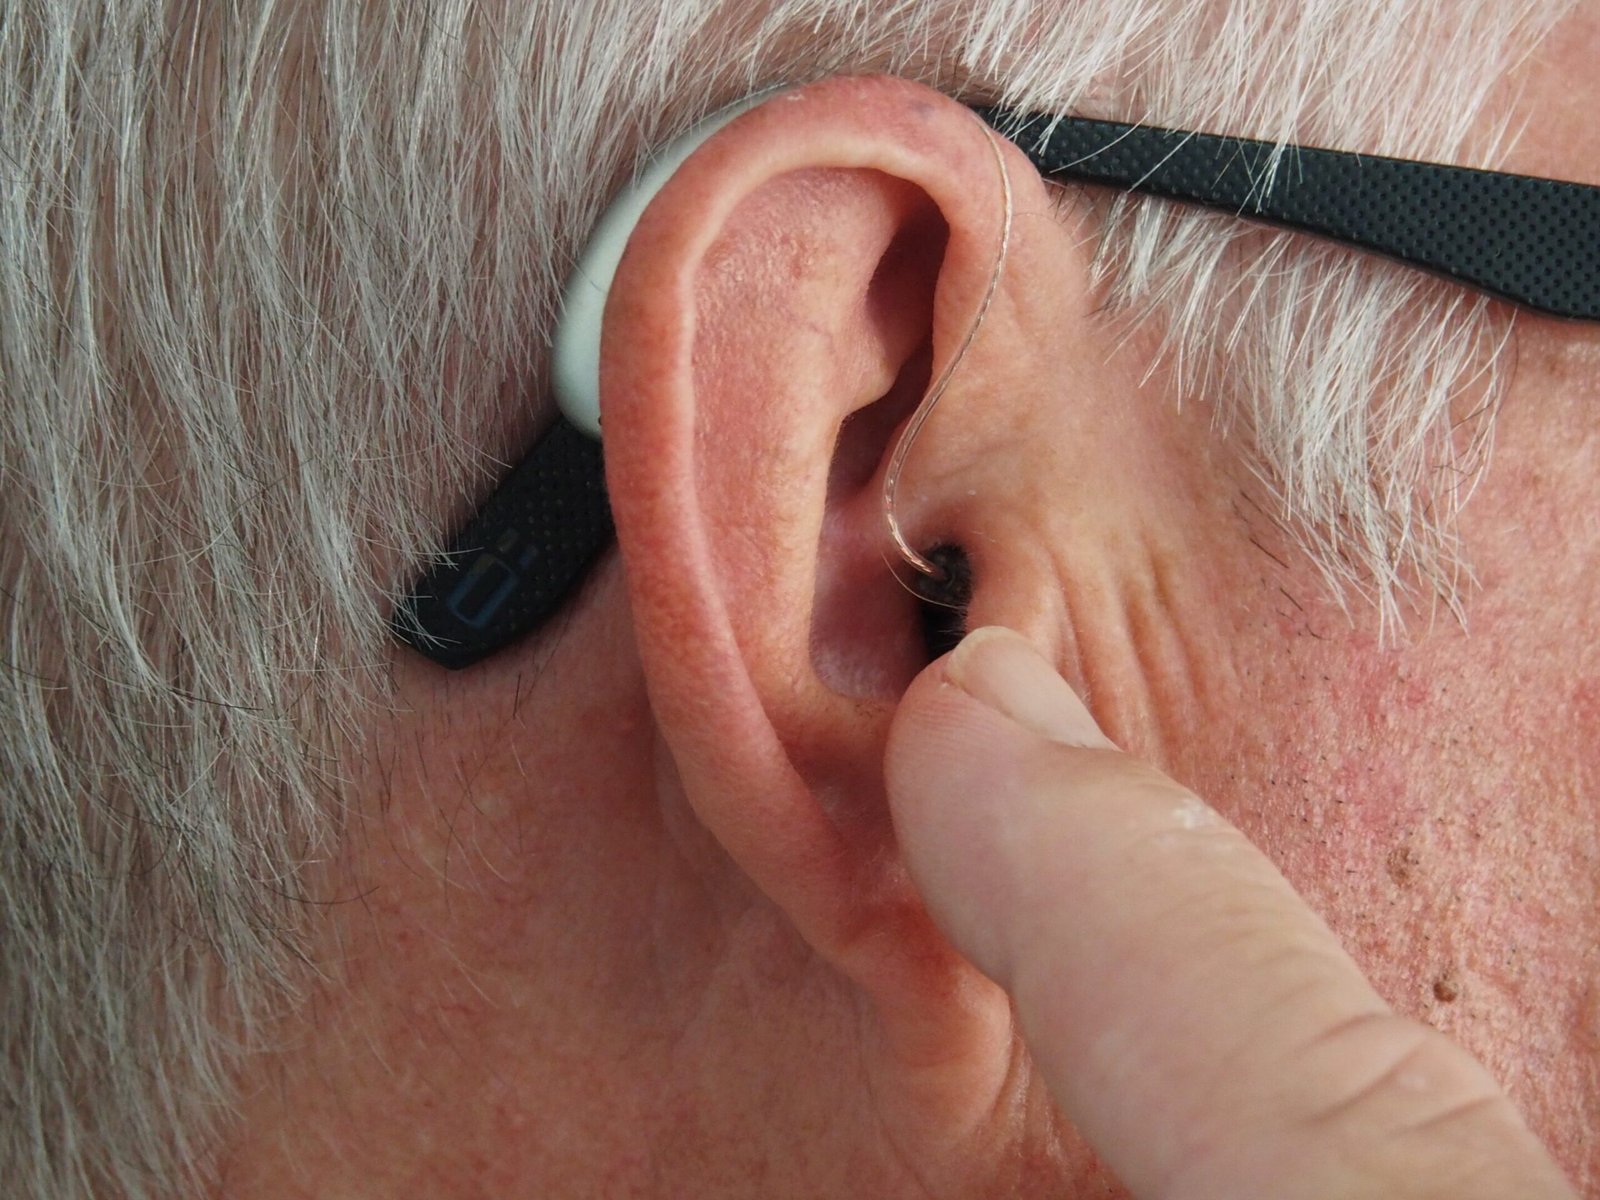 Hearing aids may help those with hearing loss live longer finds analysis